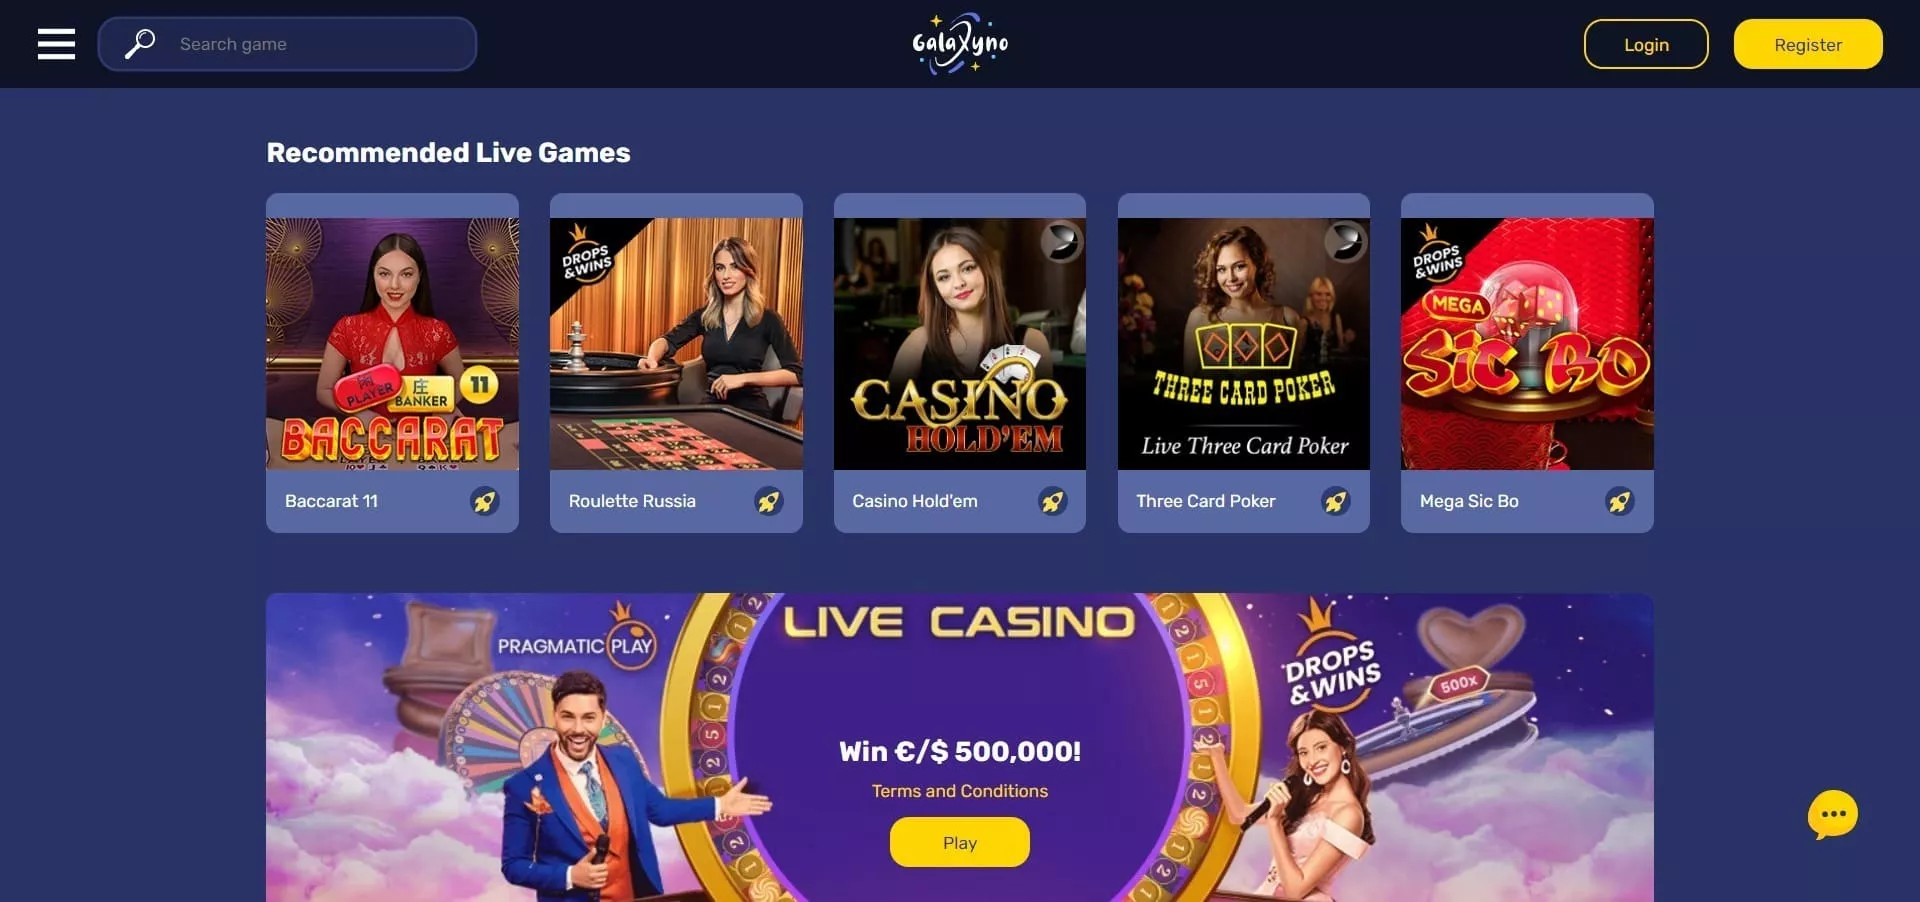 Galaxyno Casino NZ - online games and slot machines, payment options and  bonuses for users